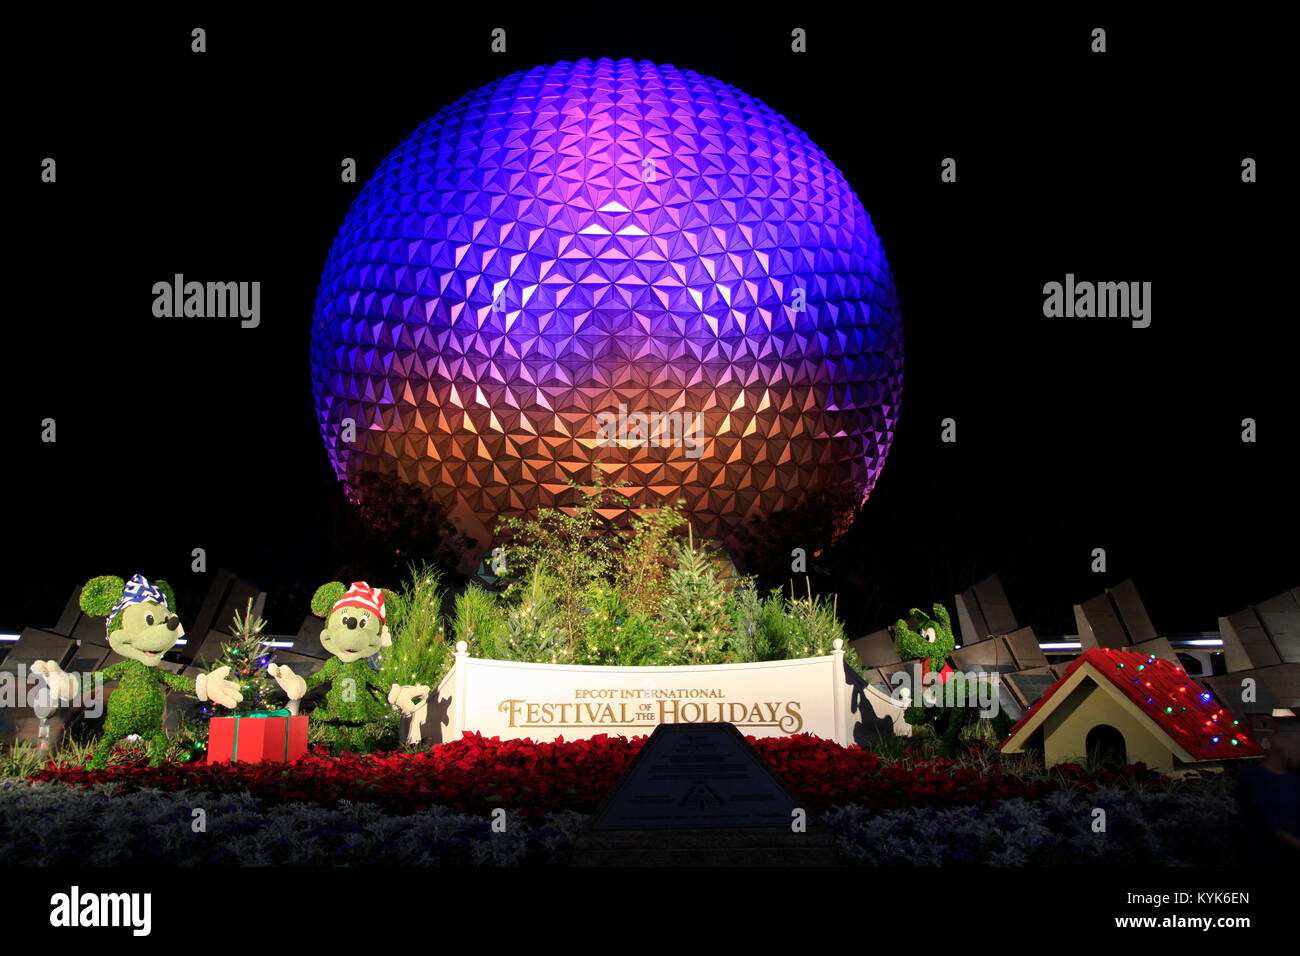 Disney's EPCOT Center sphere illuminated at night during Holidays Season with Mickey Mouse, Minnie and Pluto characters grass sculptures in front. Stock Photo